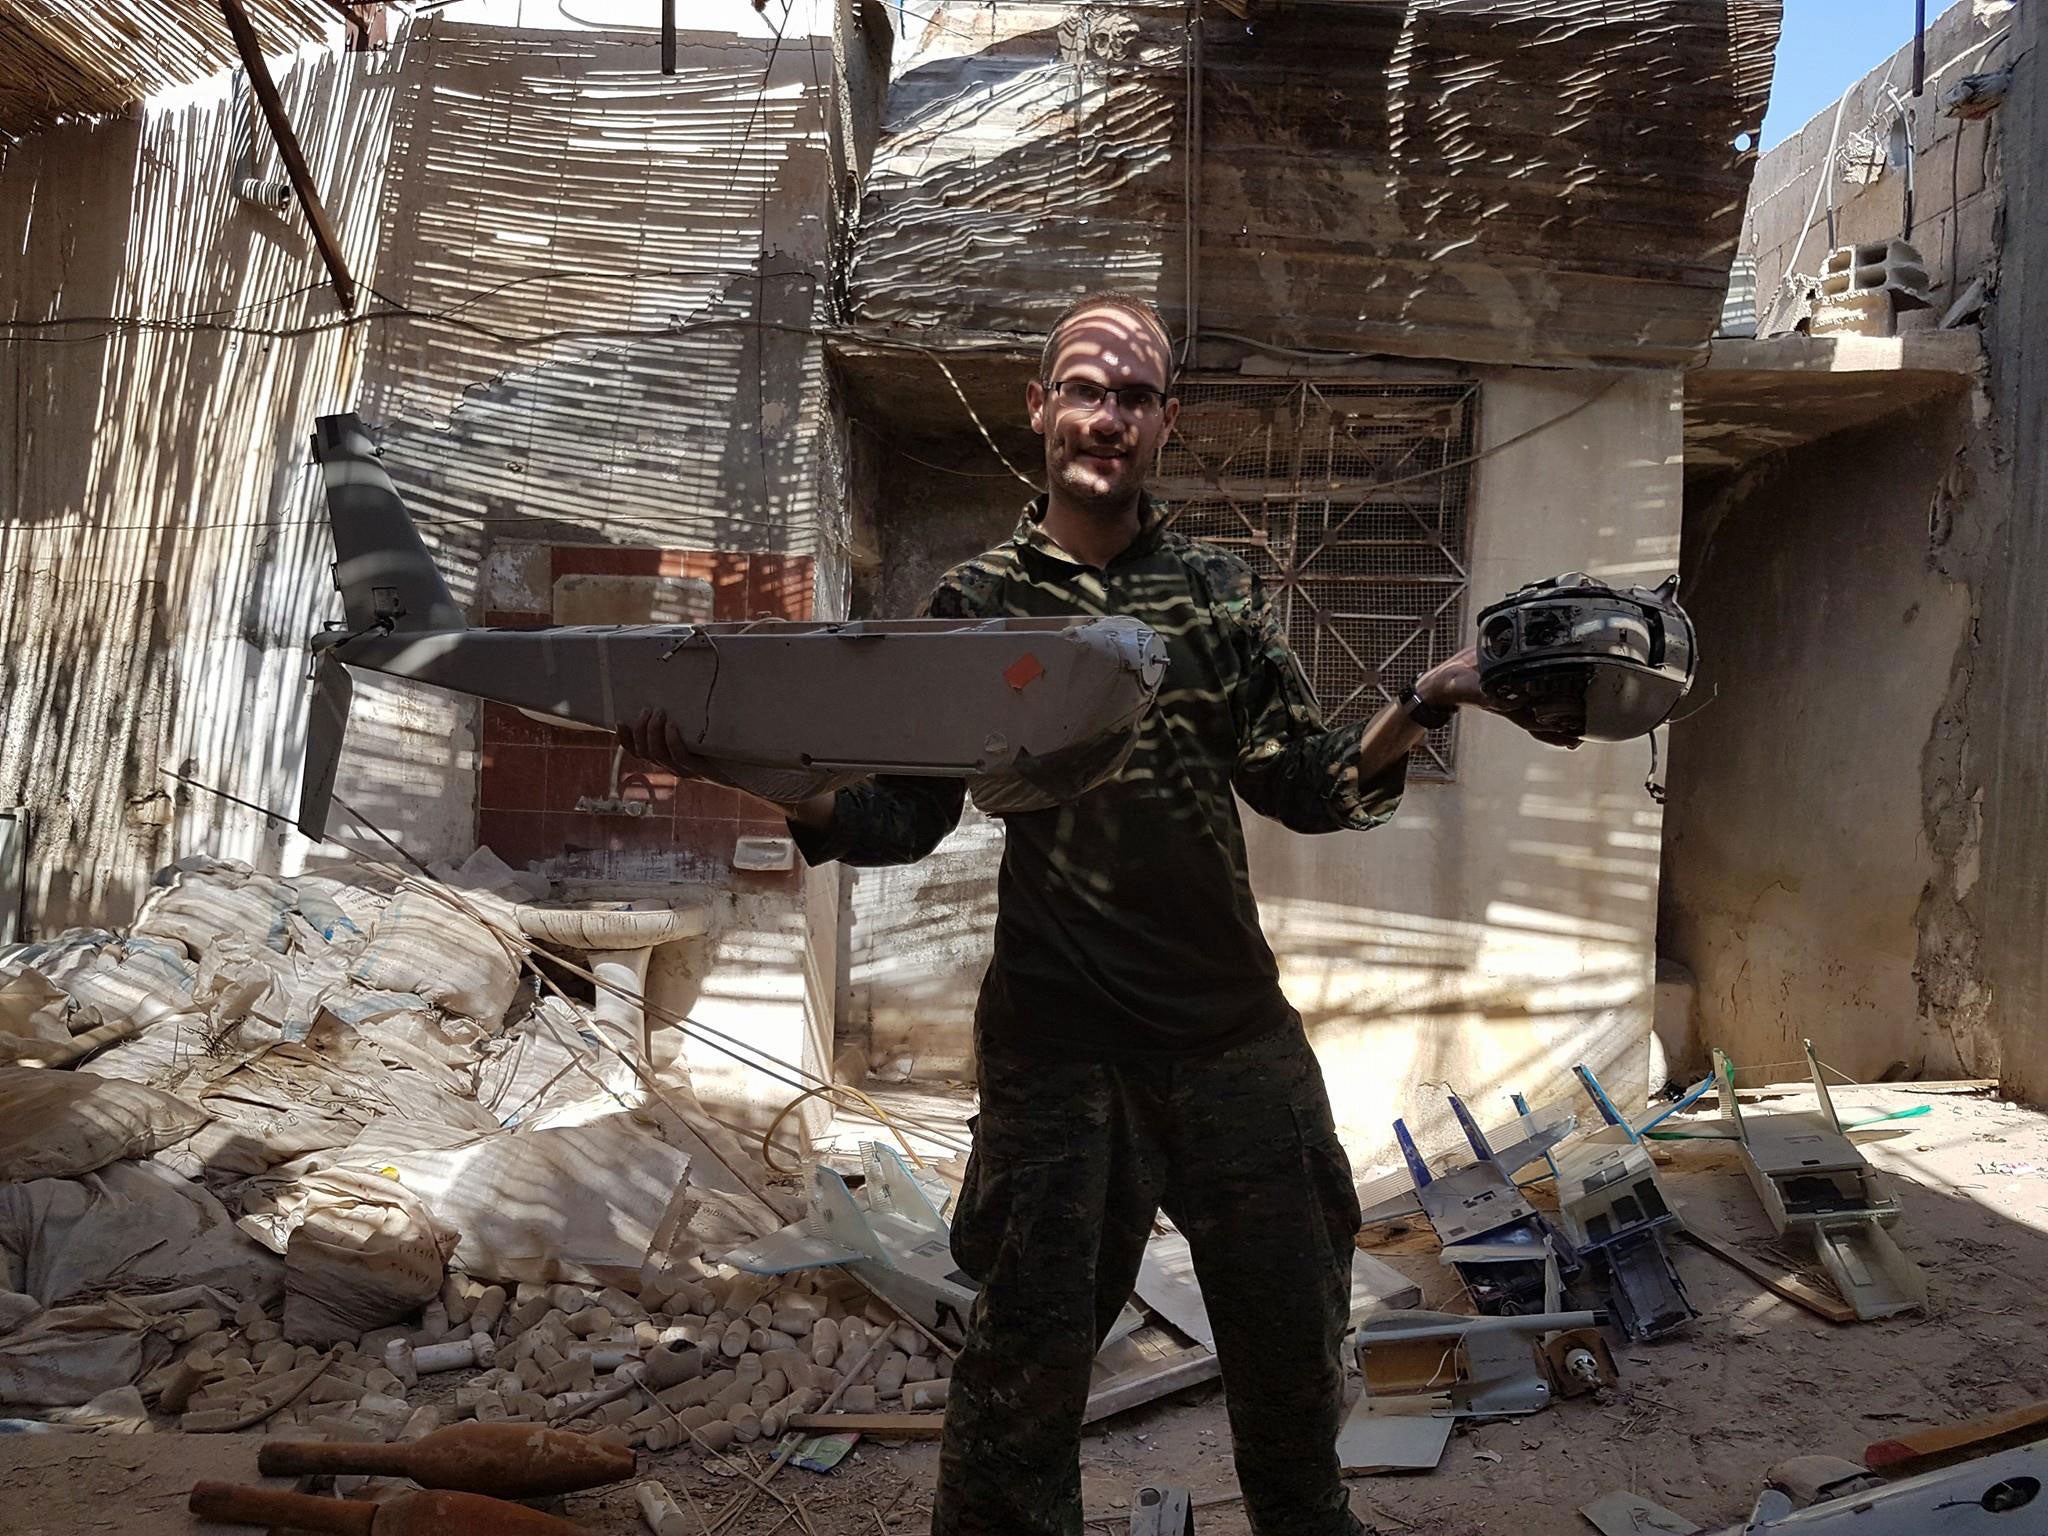 Macer Gifford with a drone modified by Isis found in Raqqa, Syria, in July